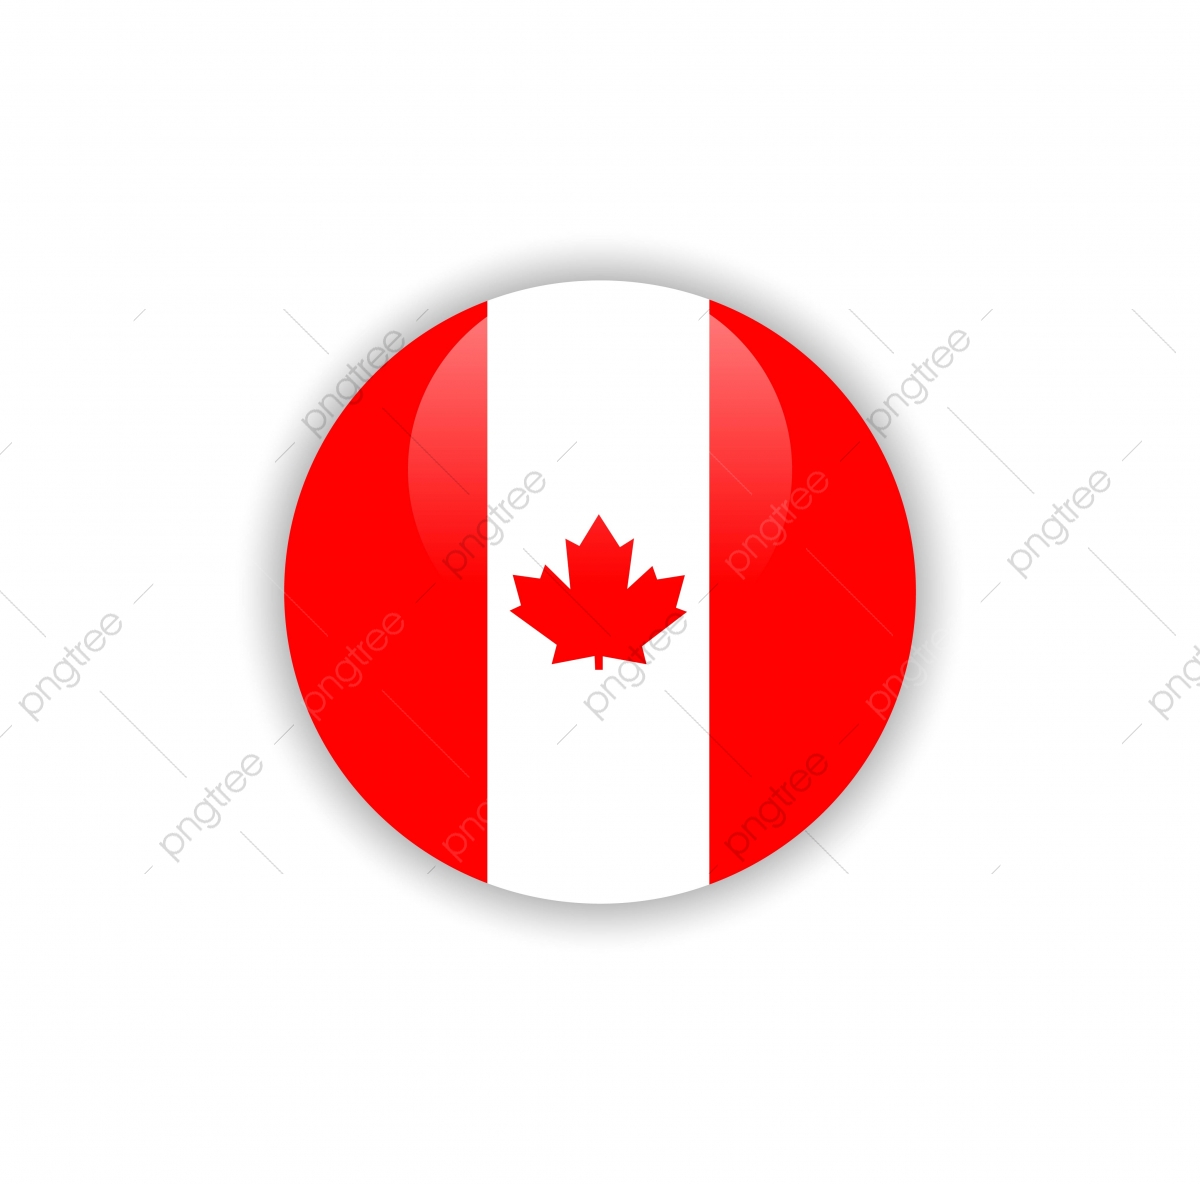 pngtree-button-canada-flag-vector-template-design-png-image_4146681.jpg